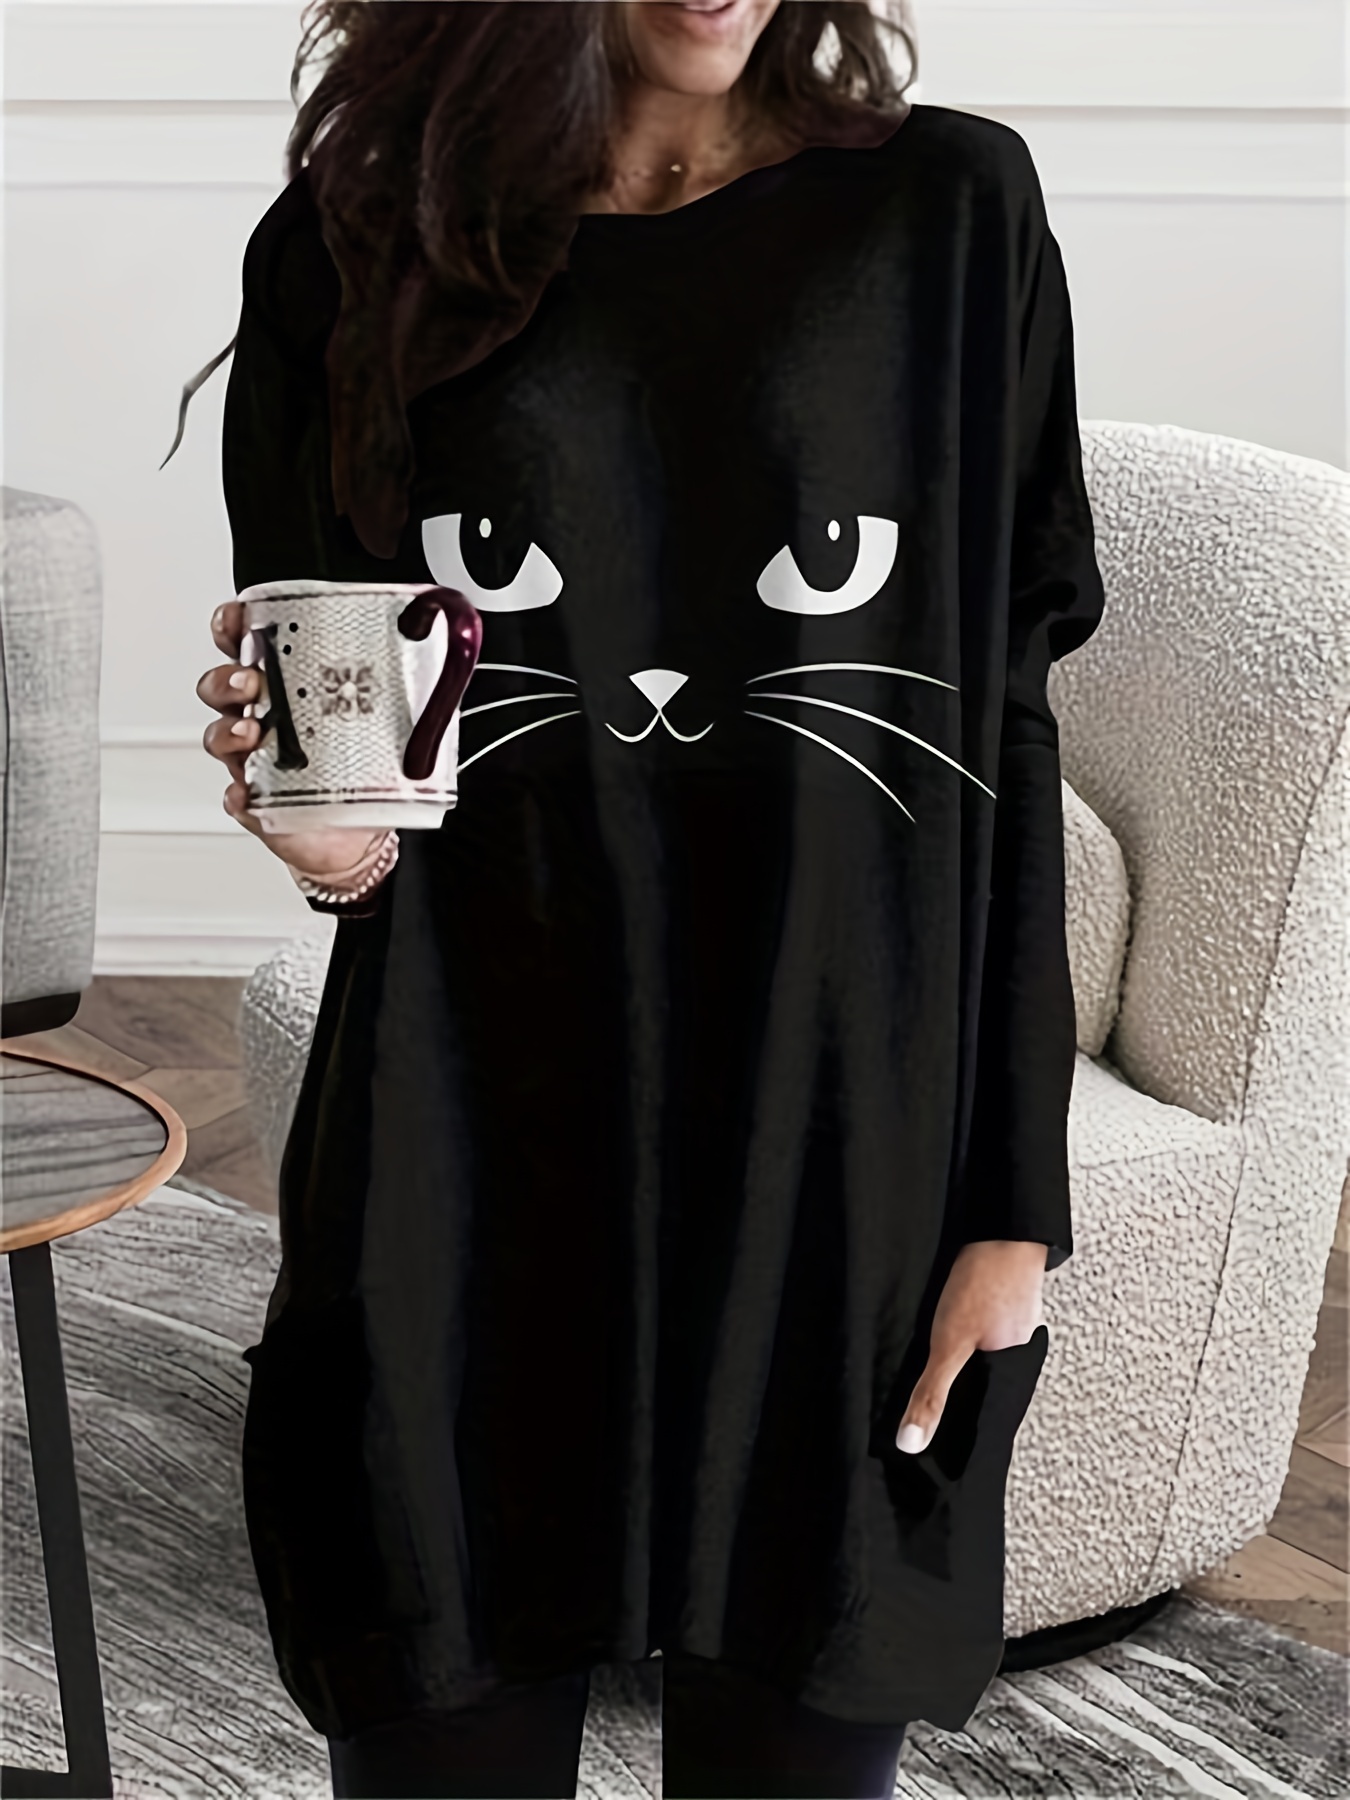 cat print crew neck baggy dress casual long sleeve pocket dress for spring fall womens clothing details 25